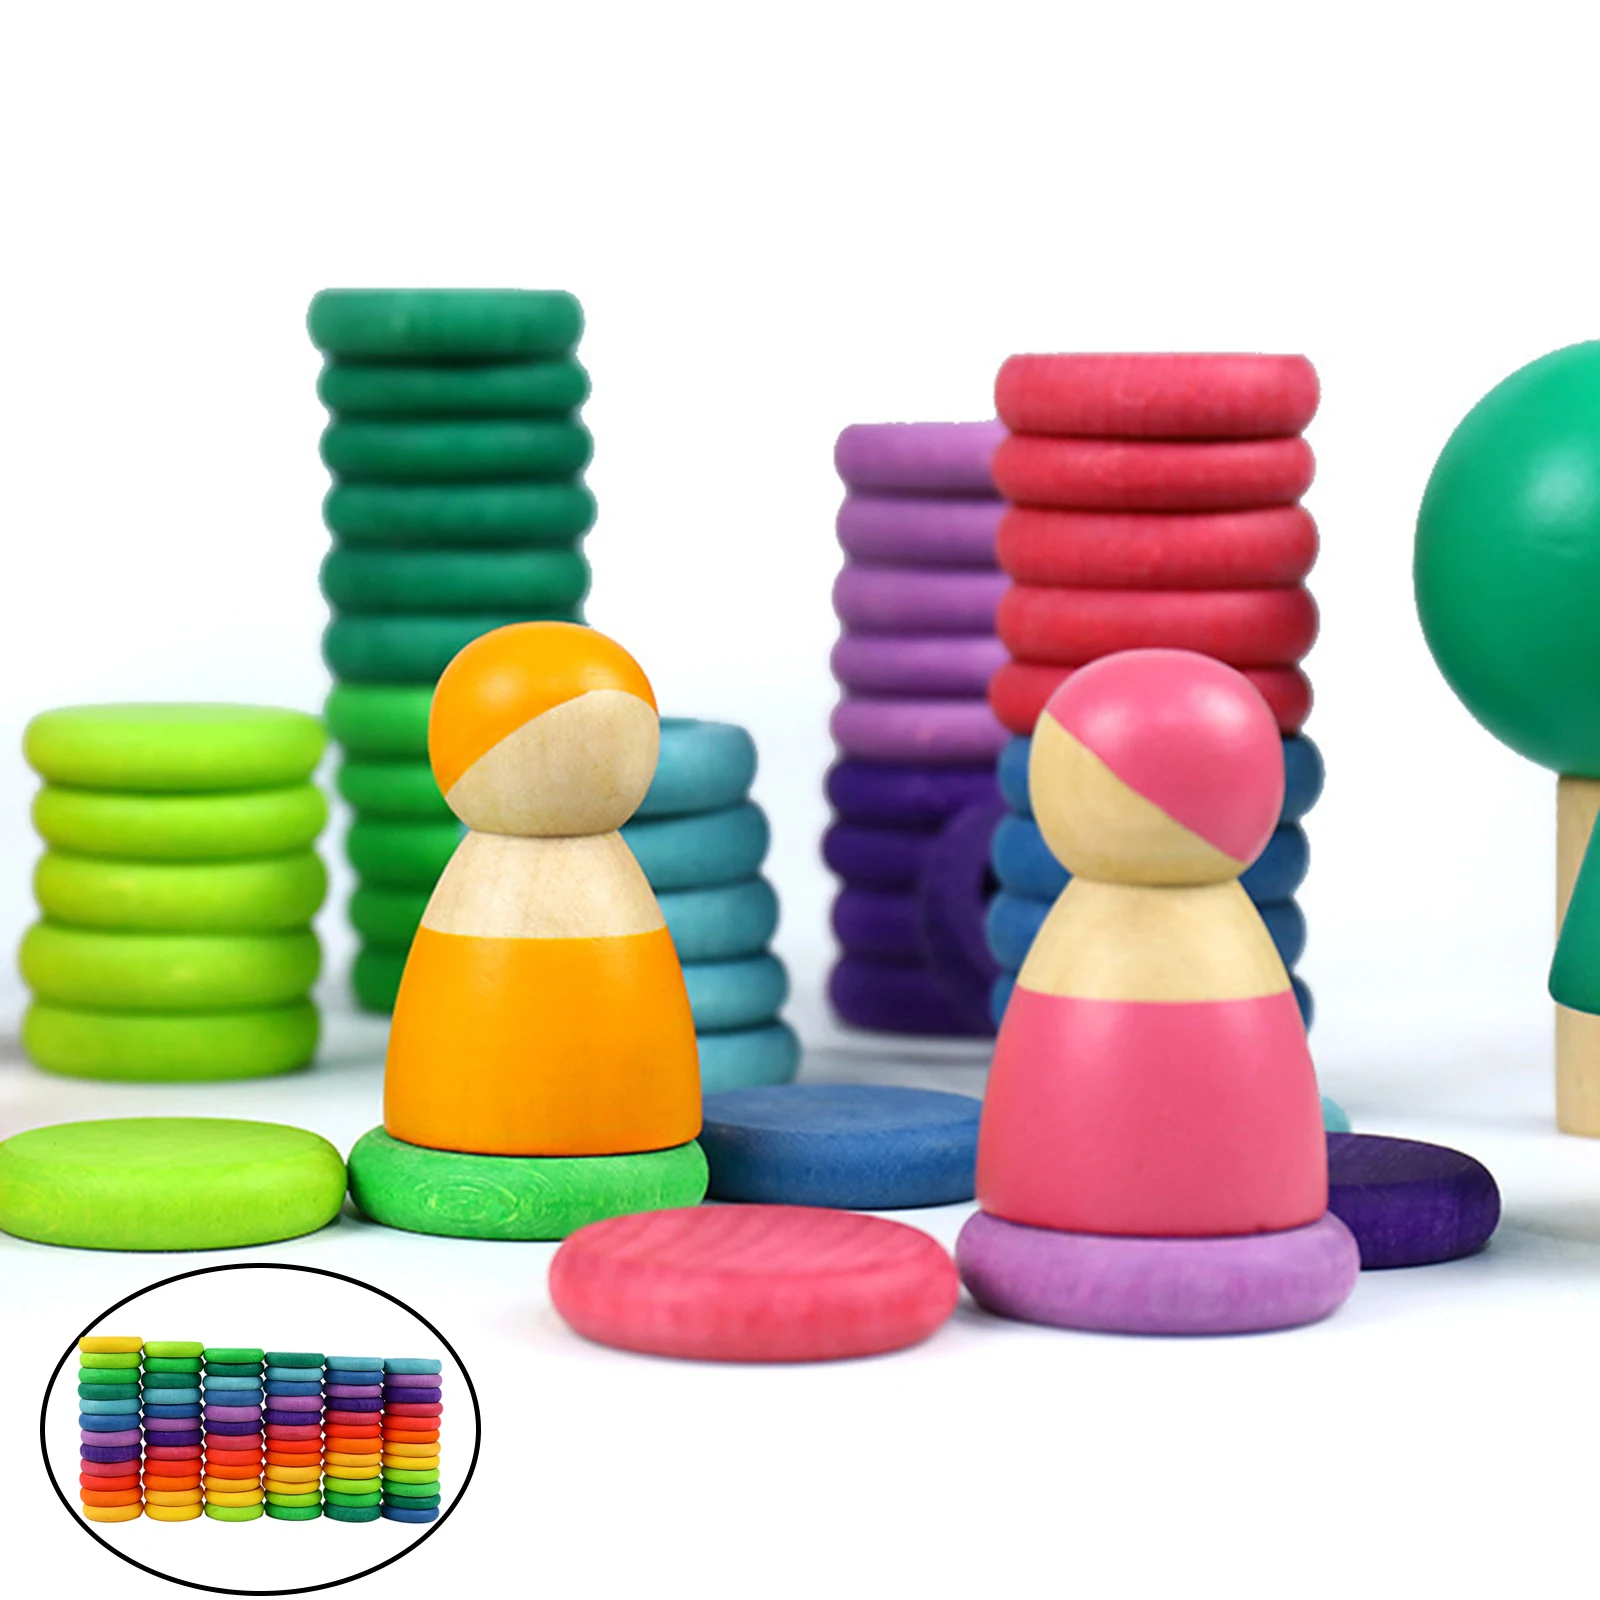 72/Set Multicolor Wood Round Block Donut Pie Shape Block Stacking Counting Stacker Puzzle Baby Creative Building Toy Home Decor